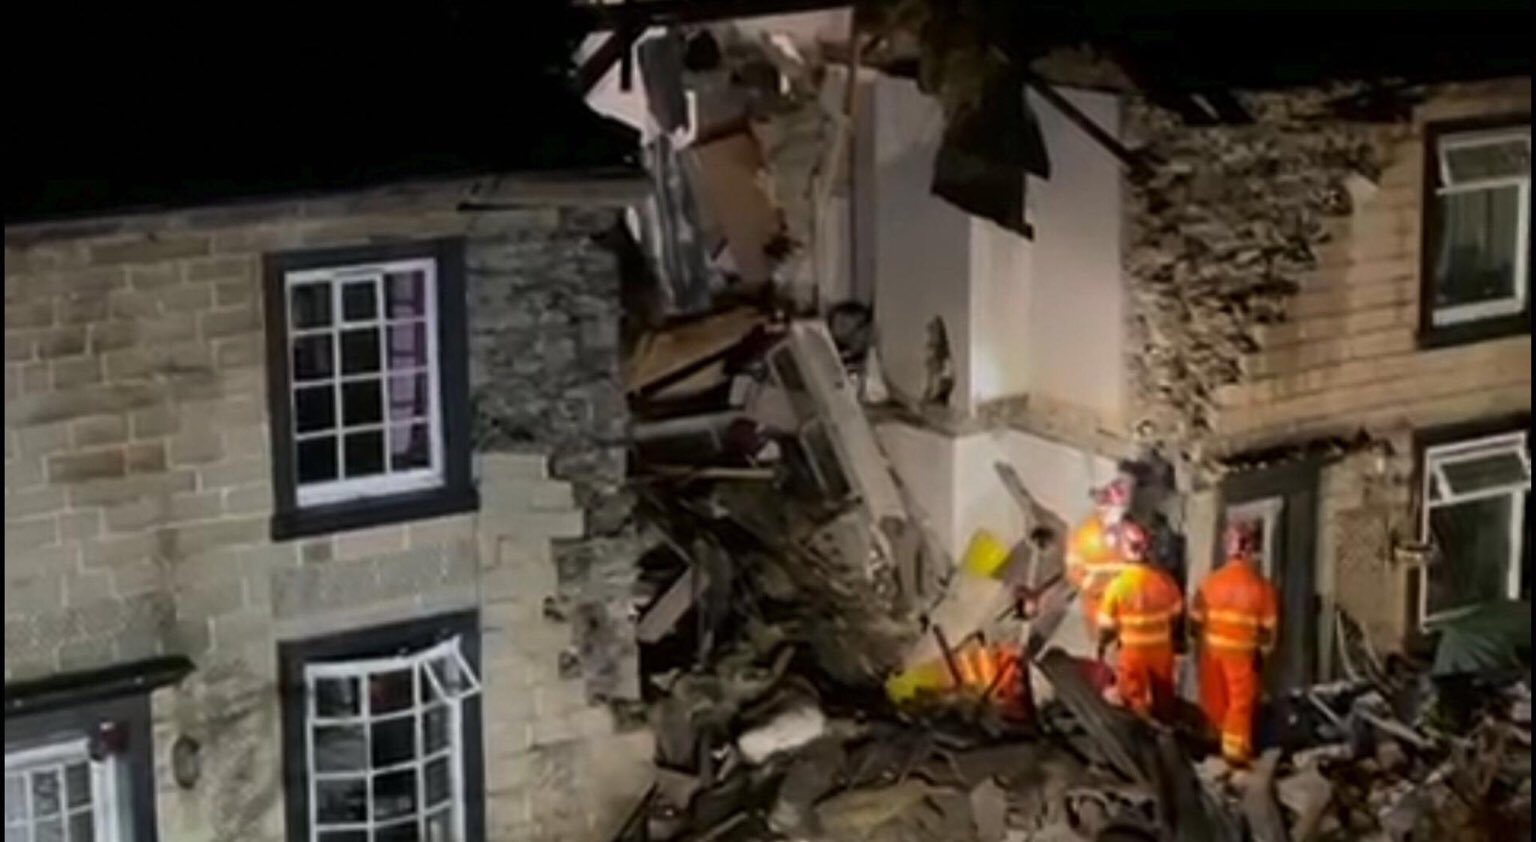 Emergency services attend scene after house collapses in Ramsbottom, The Manc